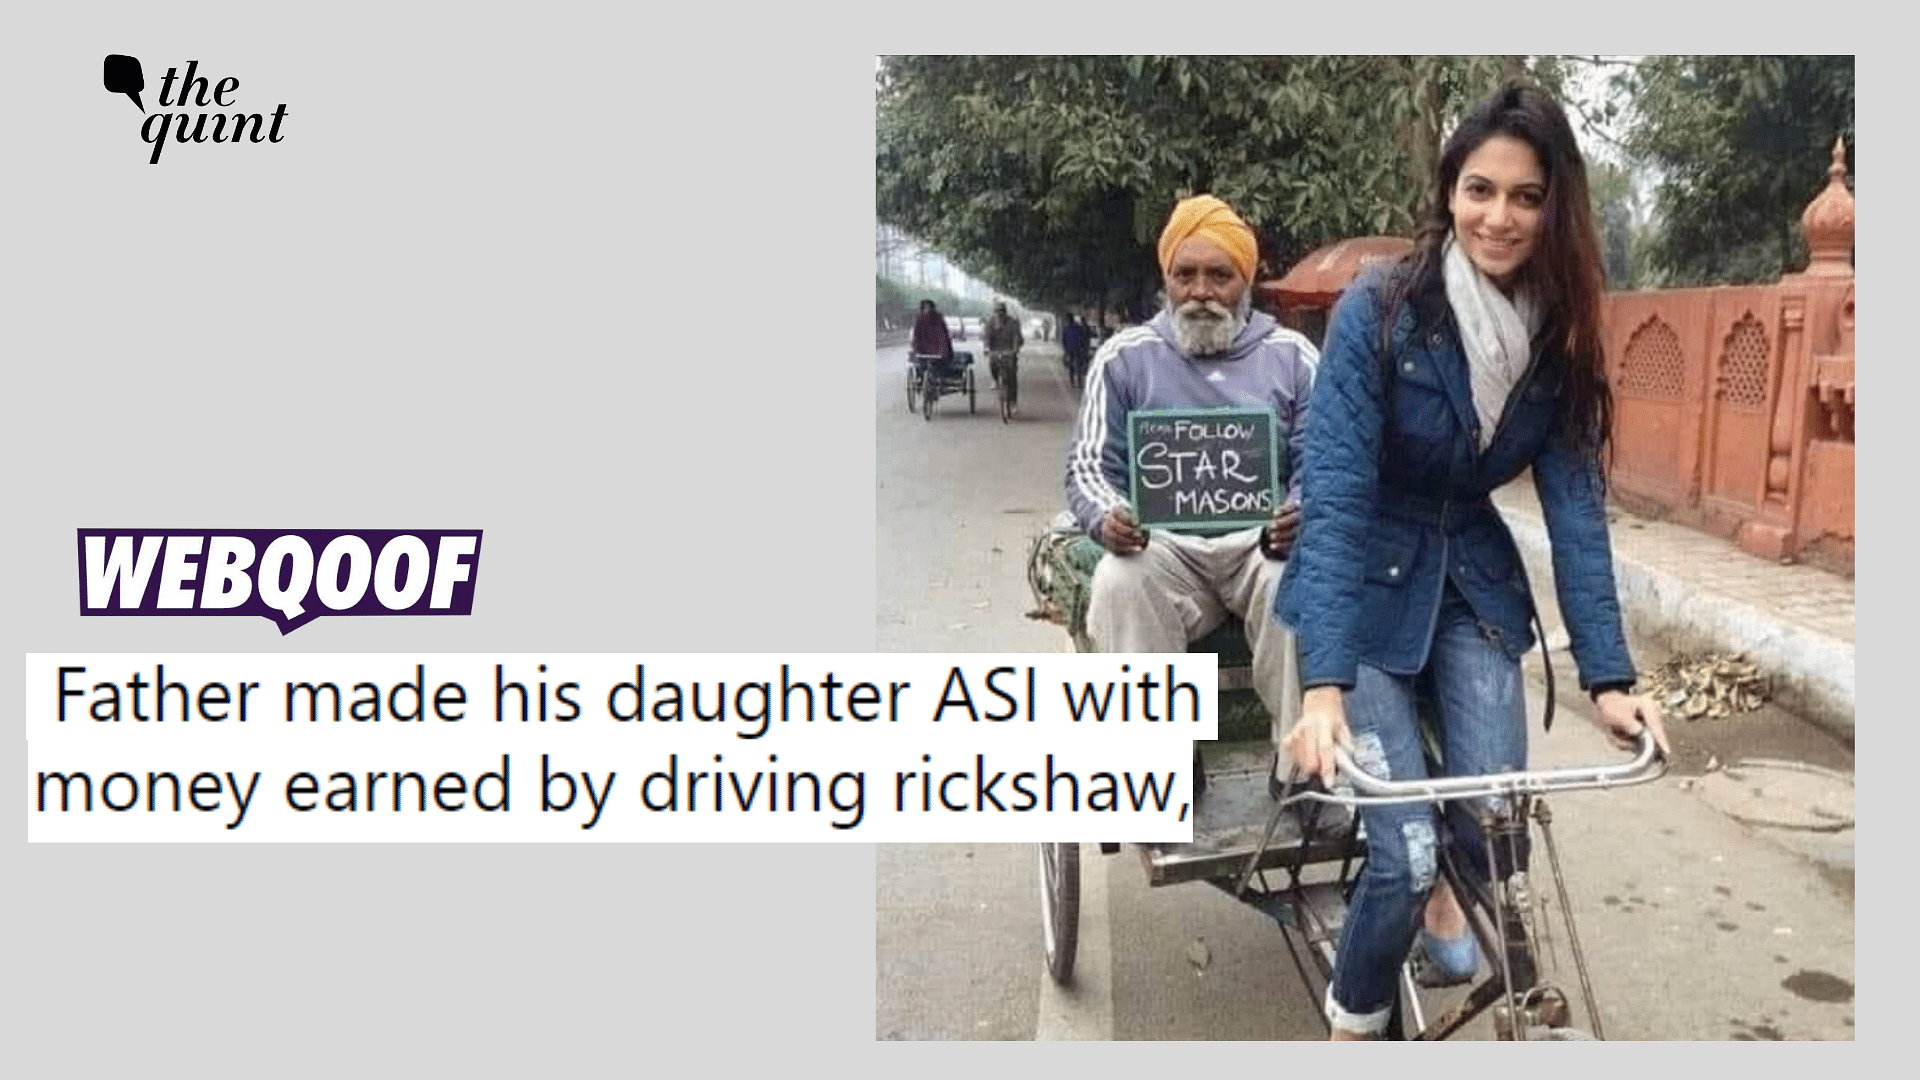 <div class="paragraphs"><p>Fact-check: The image shows an actor posing with a rickshaw driver.</p></div>